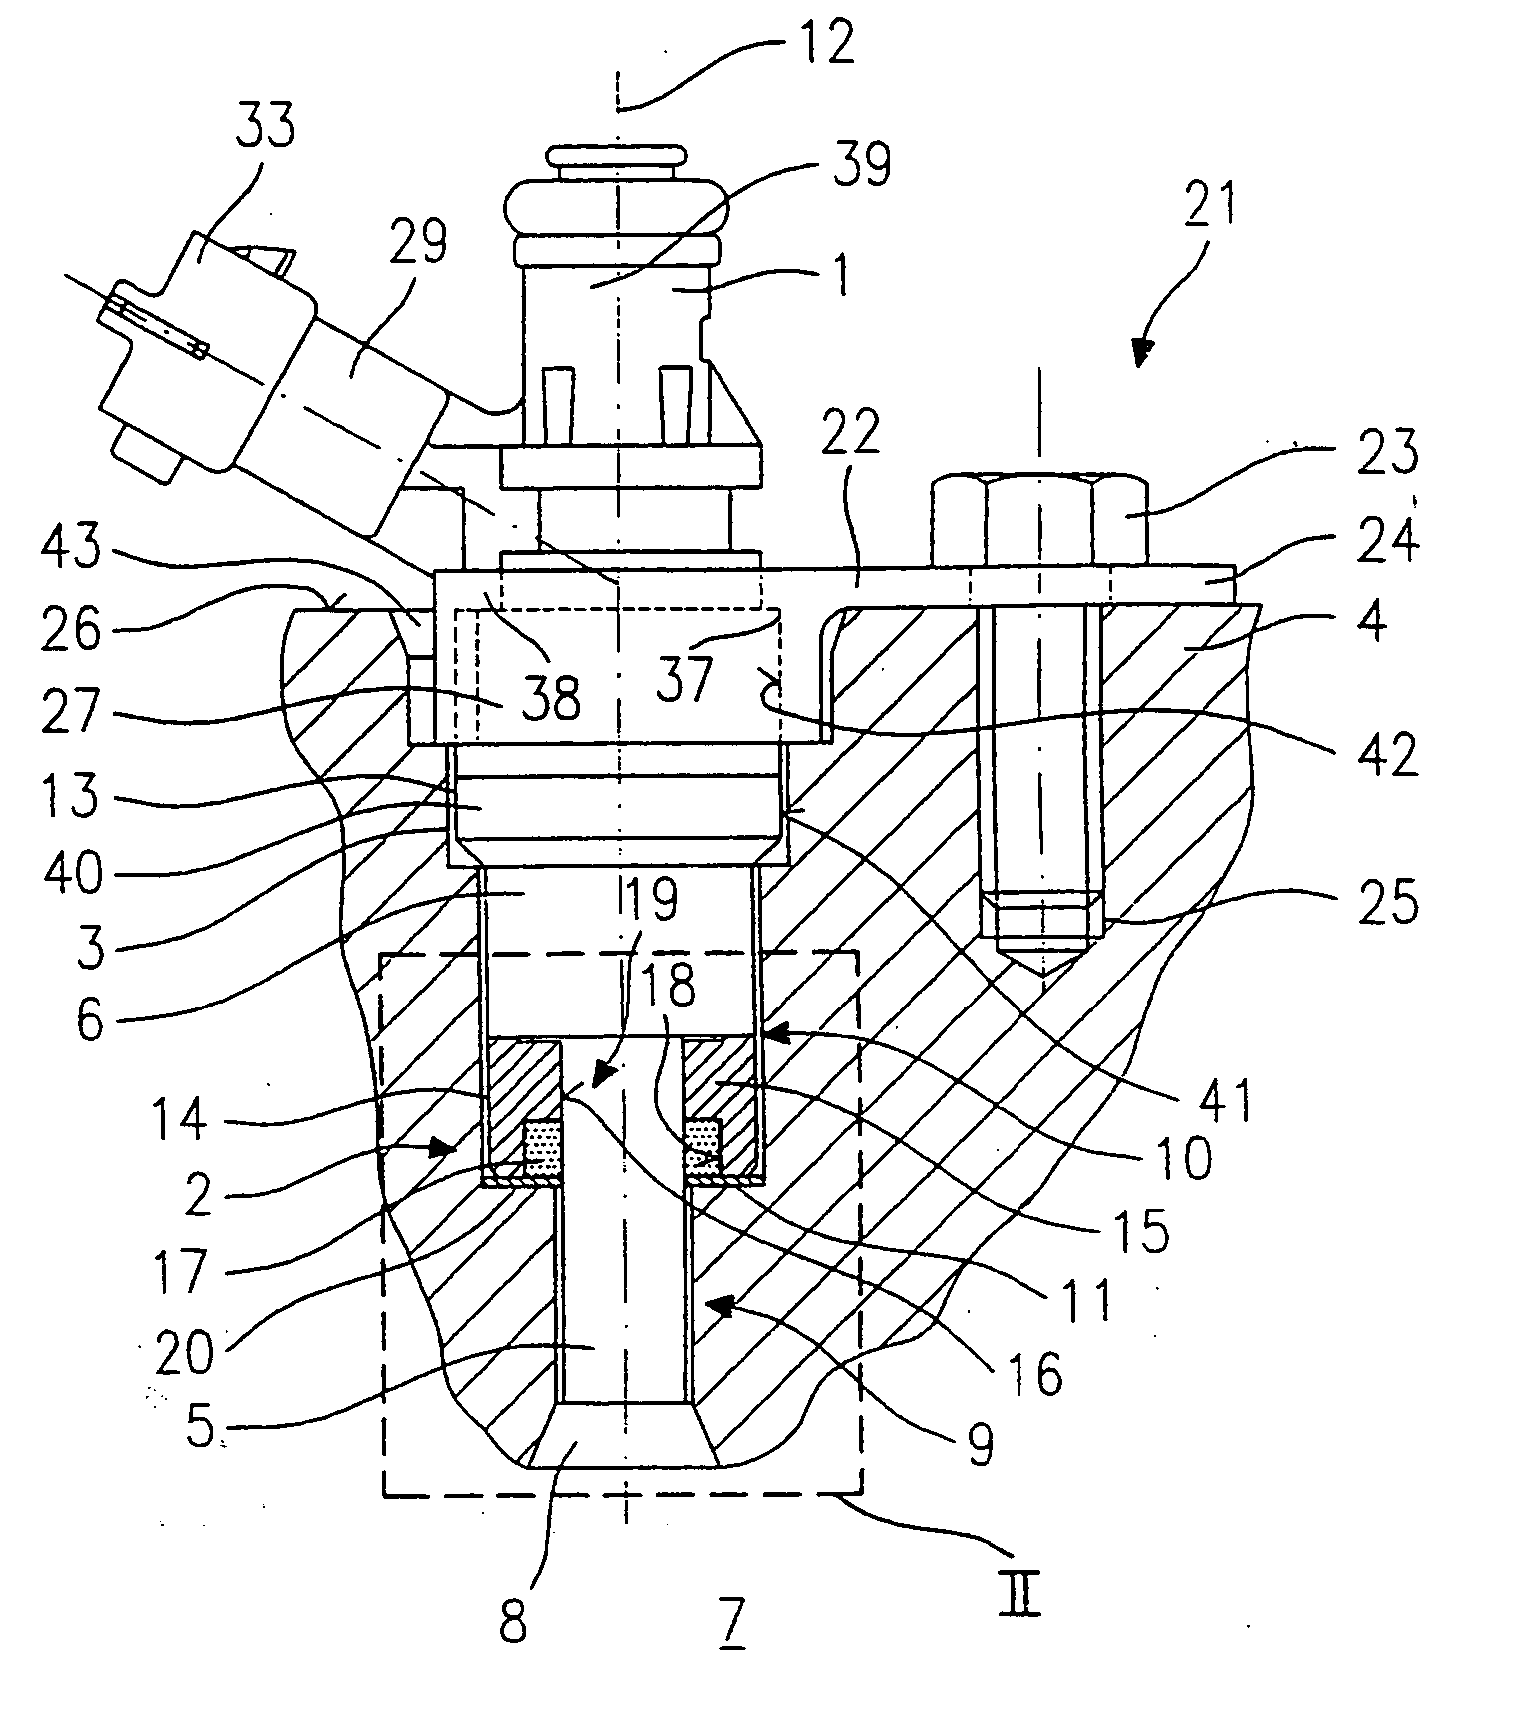 Sealing element and holding-down clamp for a fuel injector